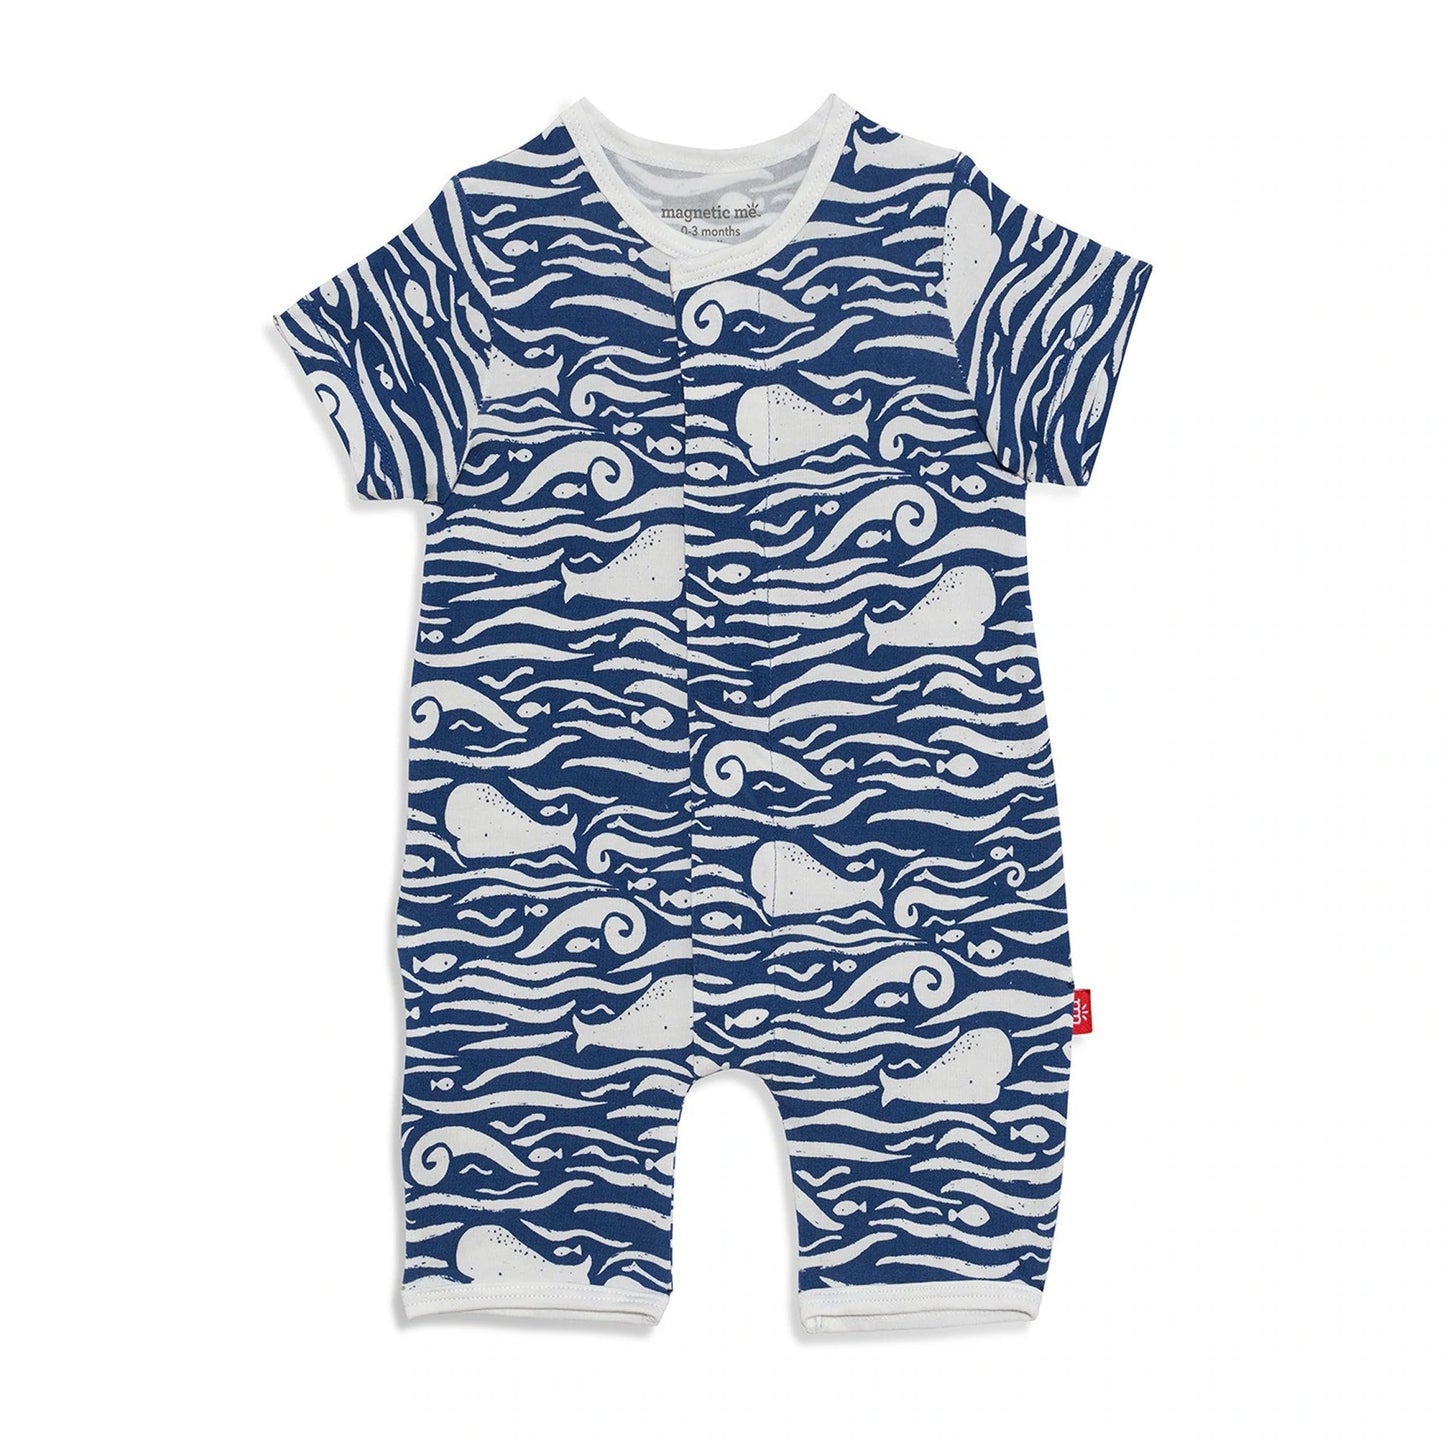 Modal Magnetic Romper - Whale Hello There